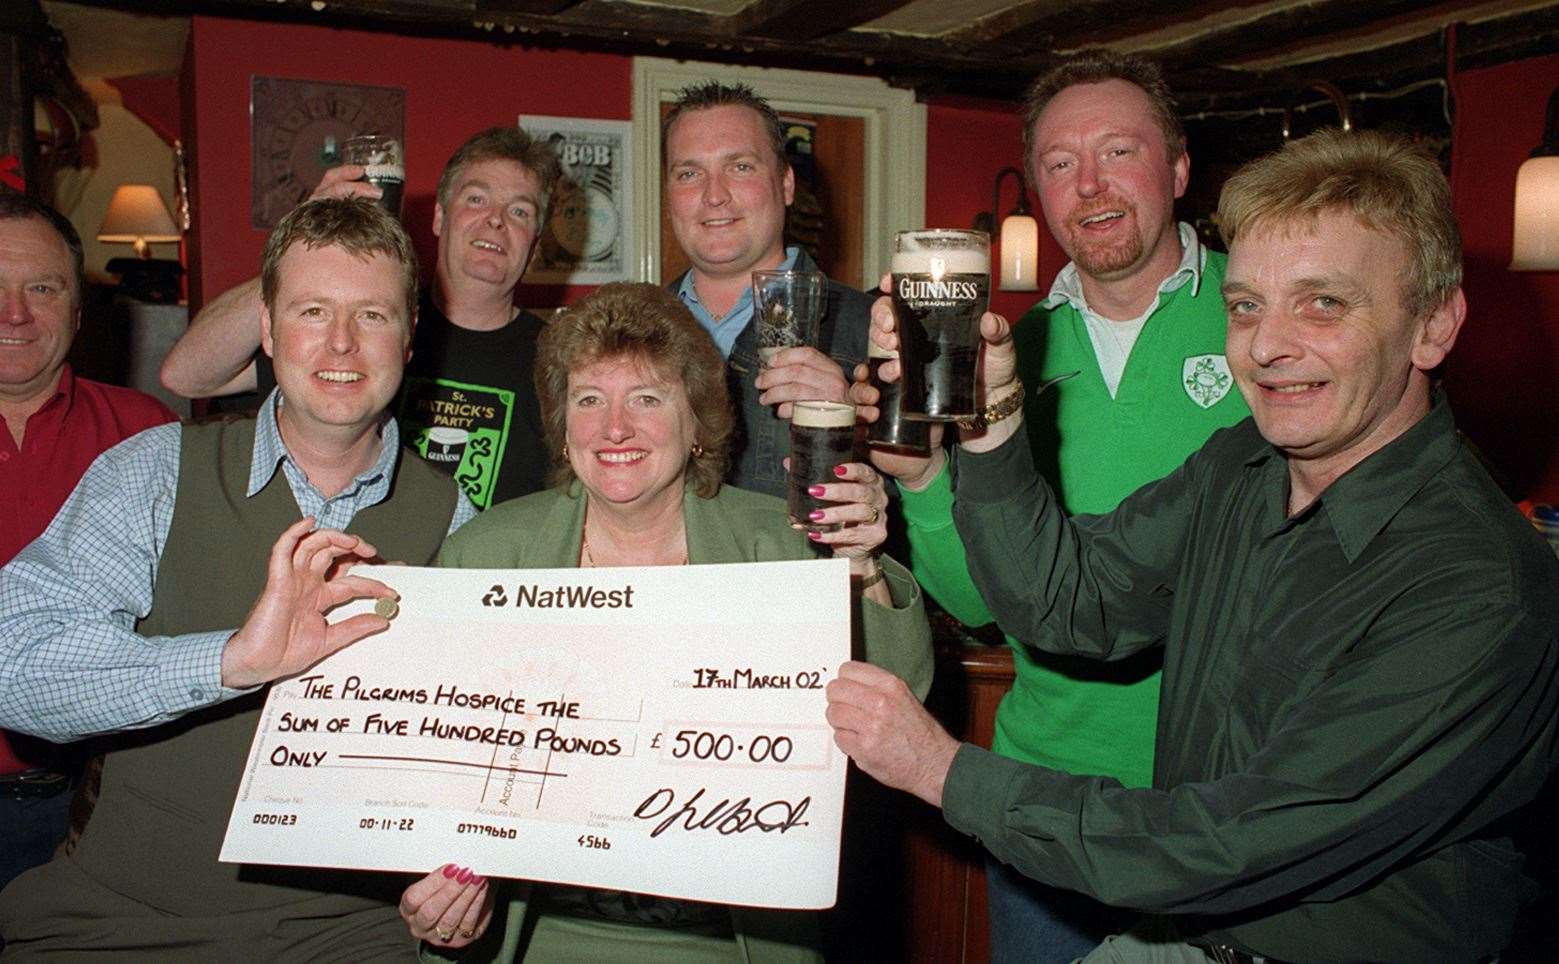 St Patrick's Day fundraising in March 2002